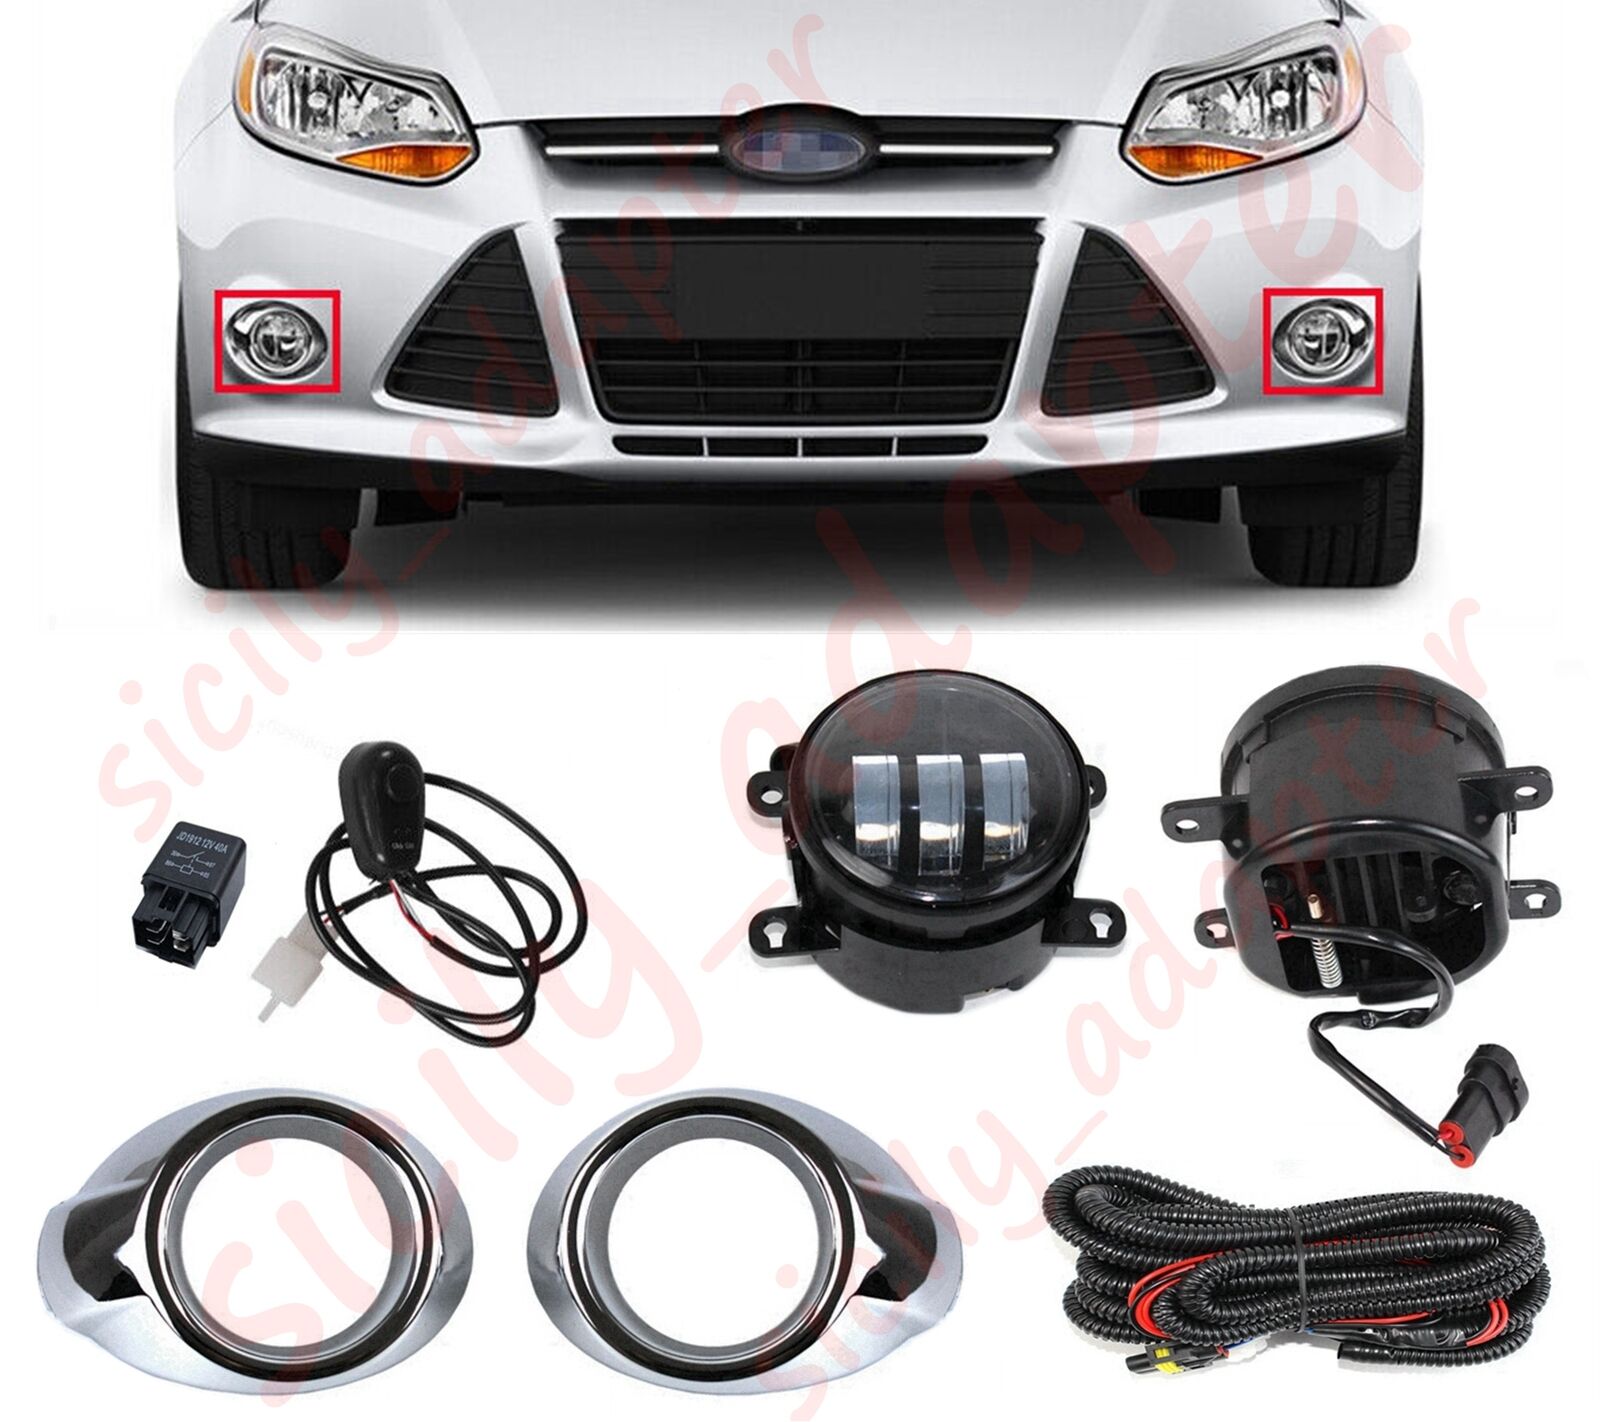 Front Bumper LED Fog Lights Lamps For 2012-2014 Ford Focus Pair w/Cover Wiring